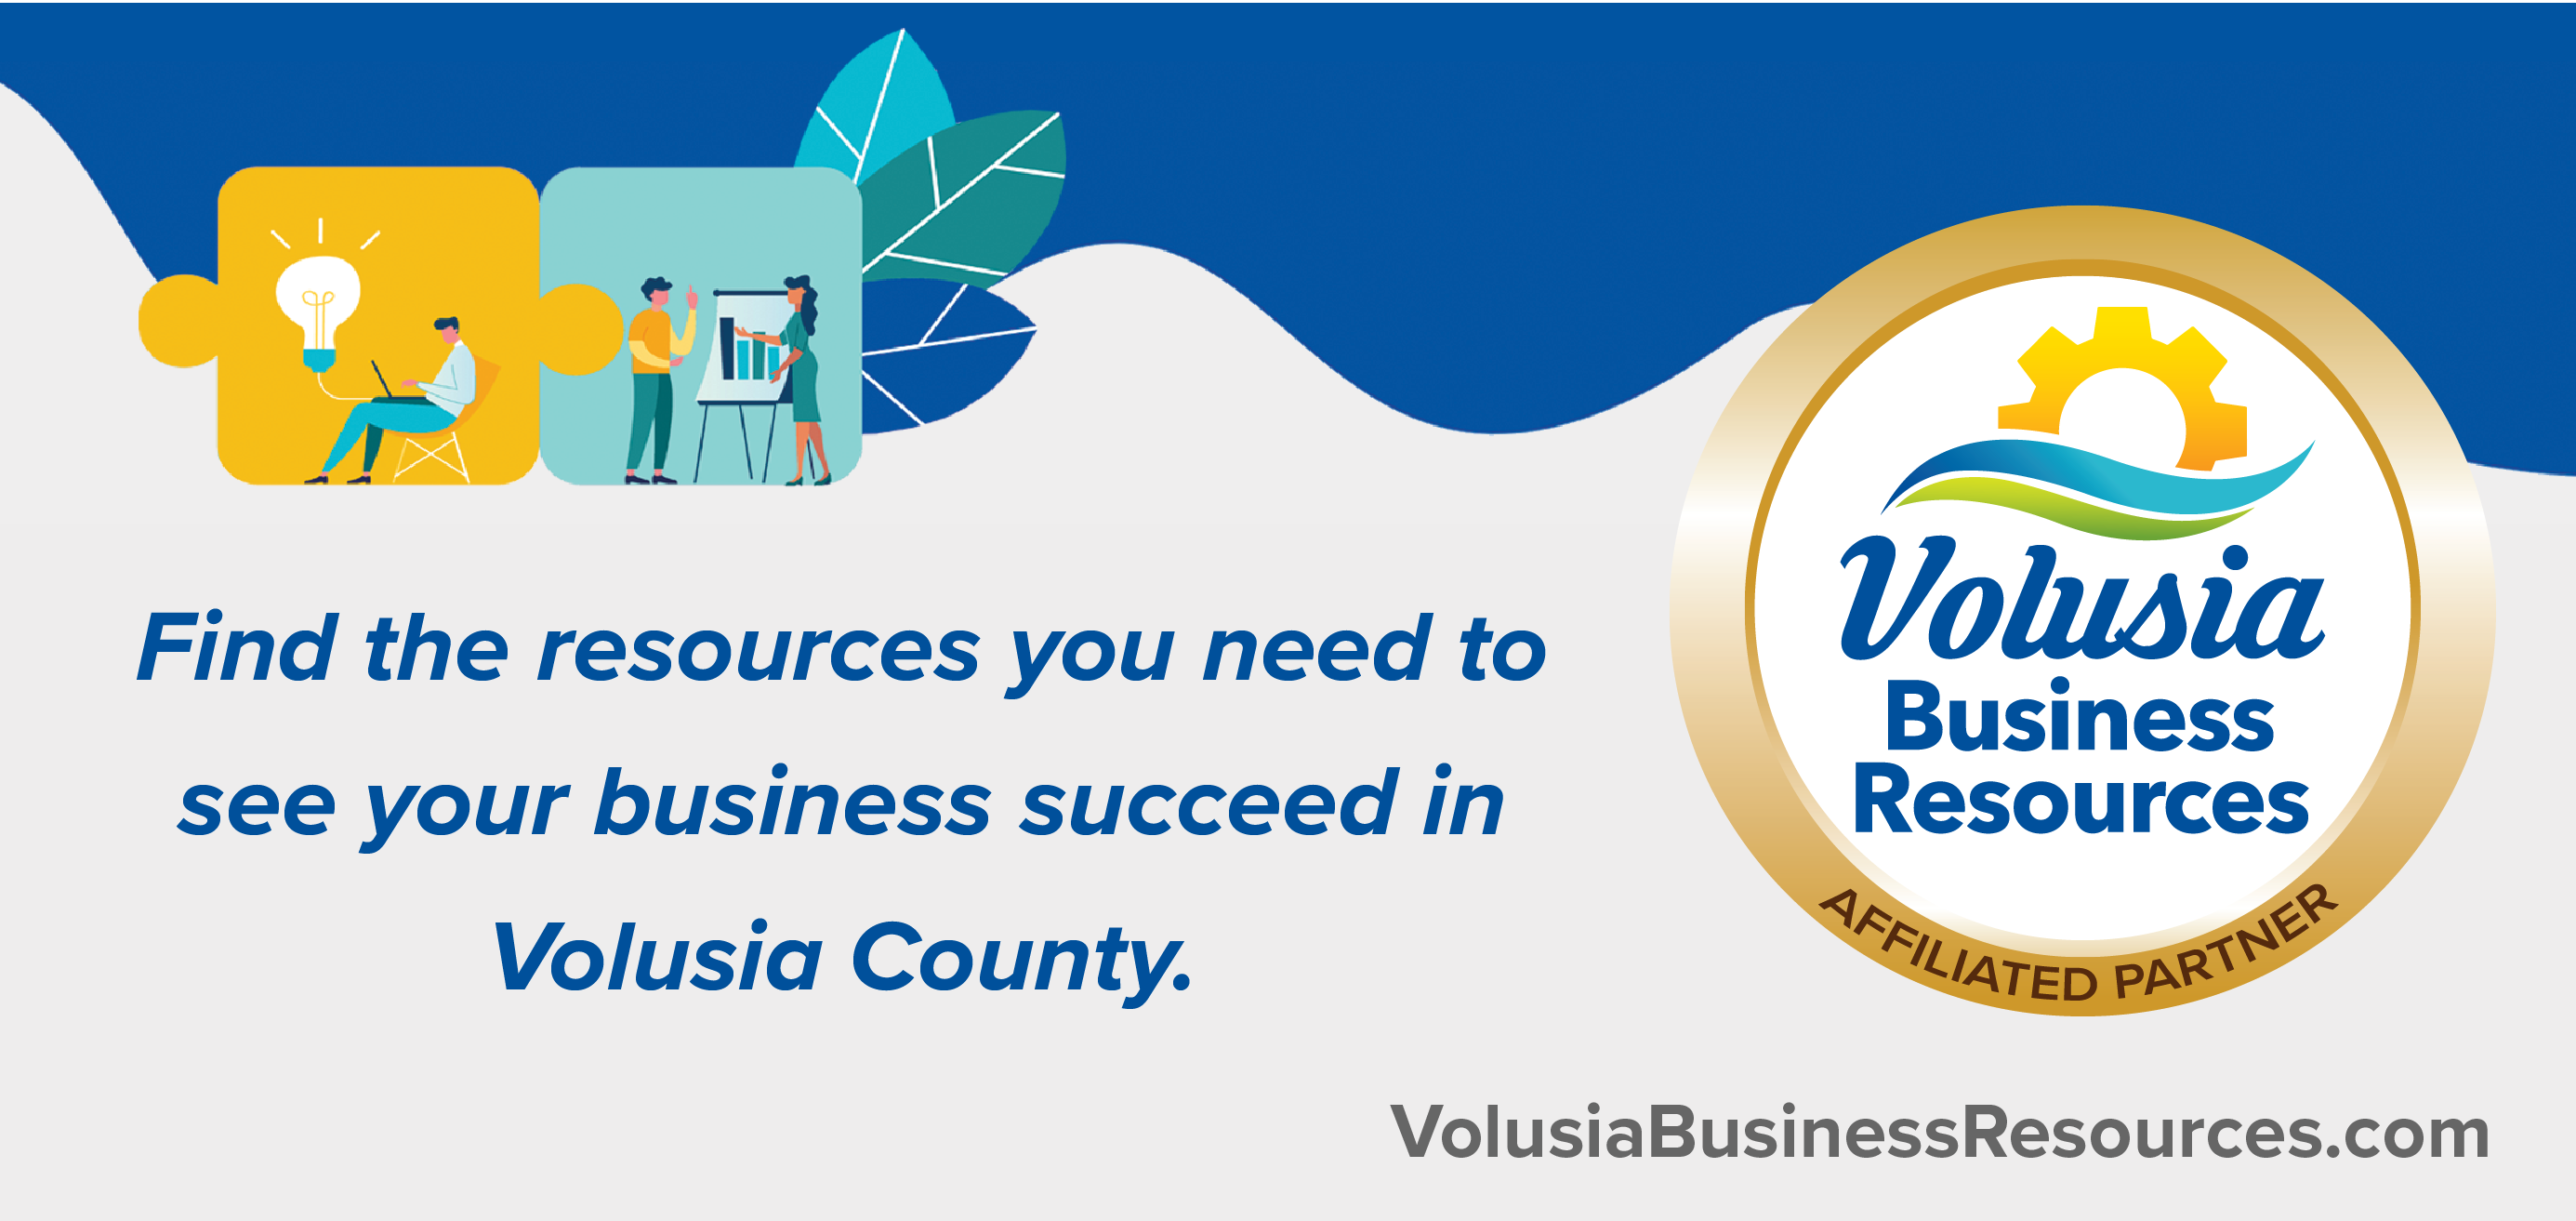 Find the resources you need to see your business succeed in Volusia County. Volusia Business Resources Affiliated Partner.